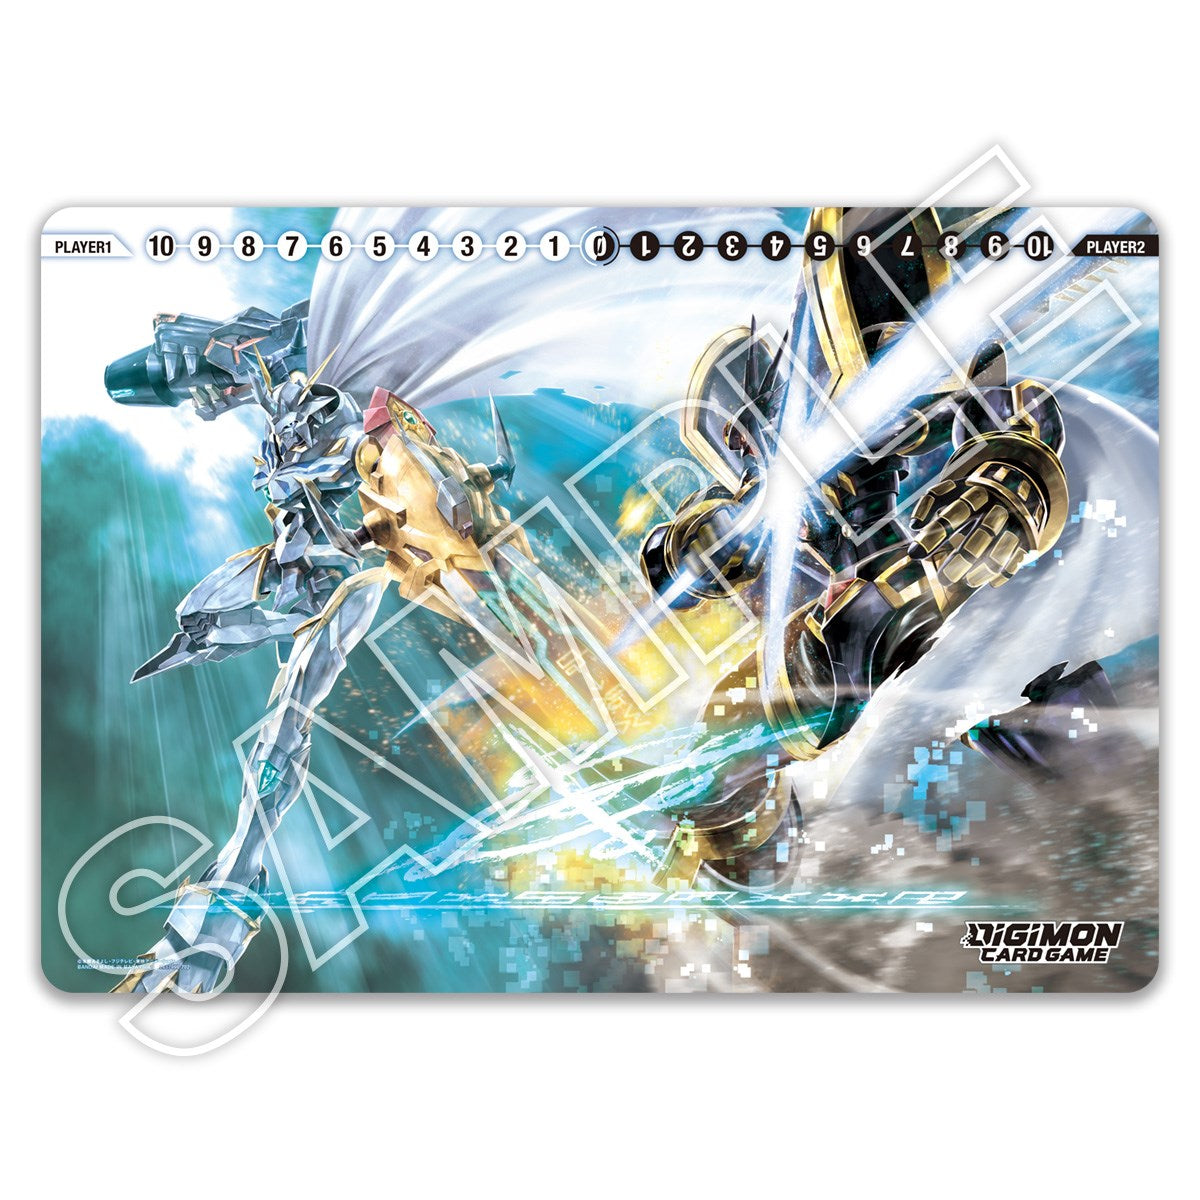 Digimon Card Game: Tamer's Set 5 Exclusive Playmat